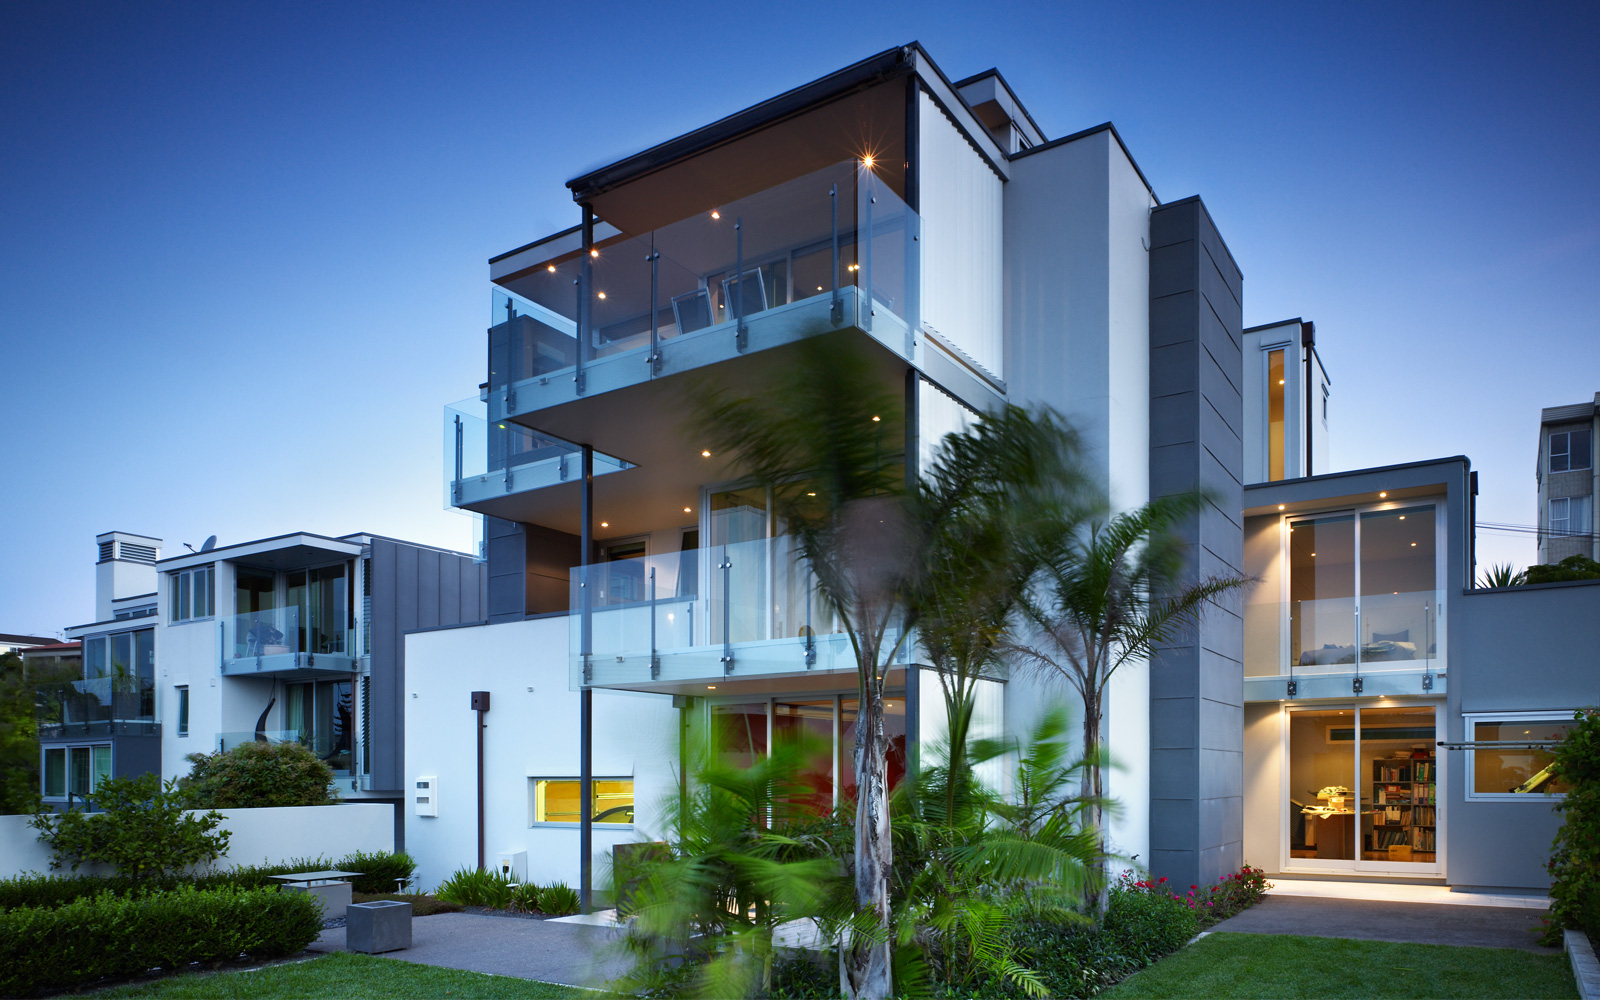 architecturally designed townhouse exterior glass balconies